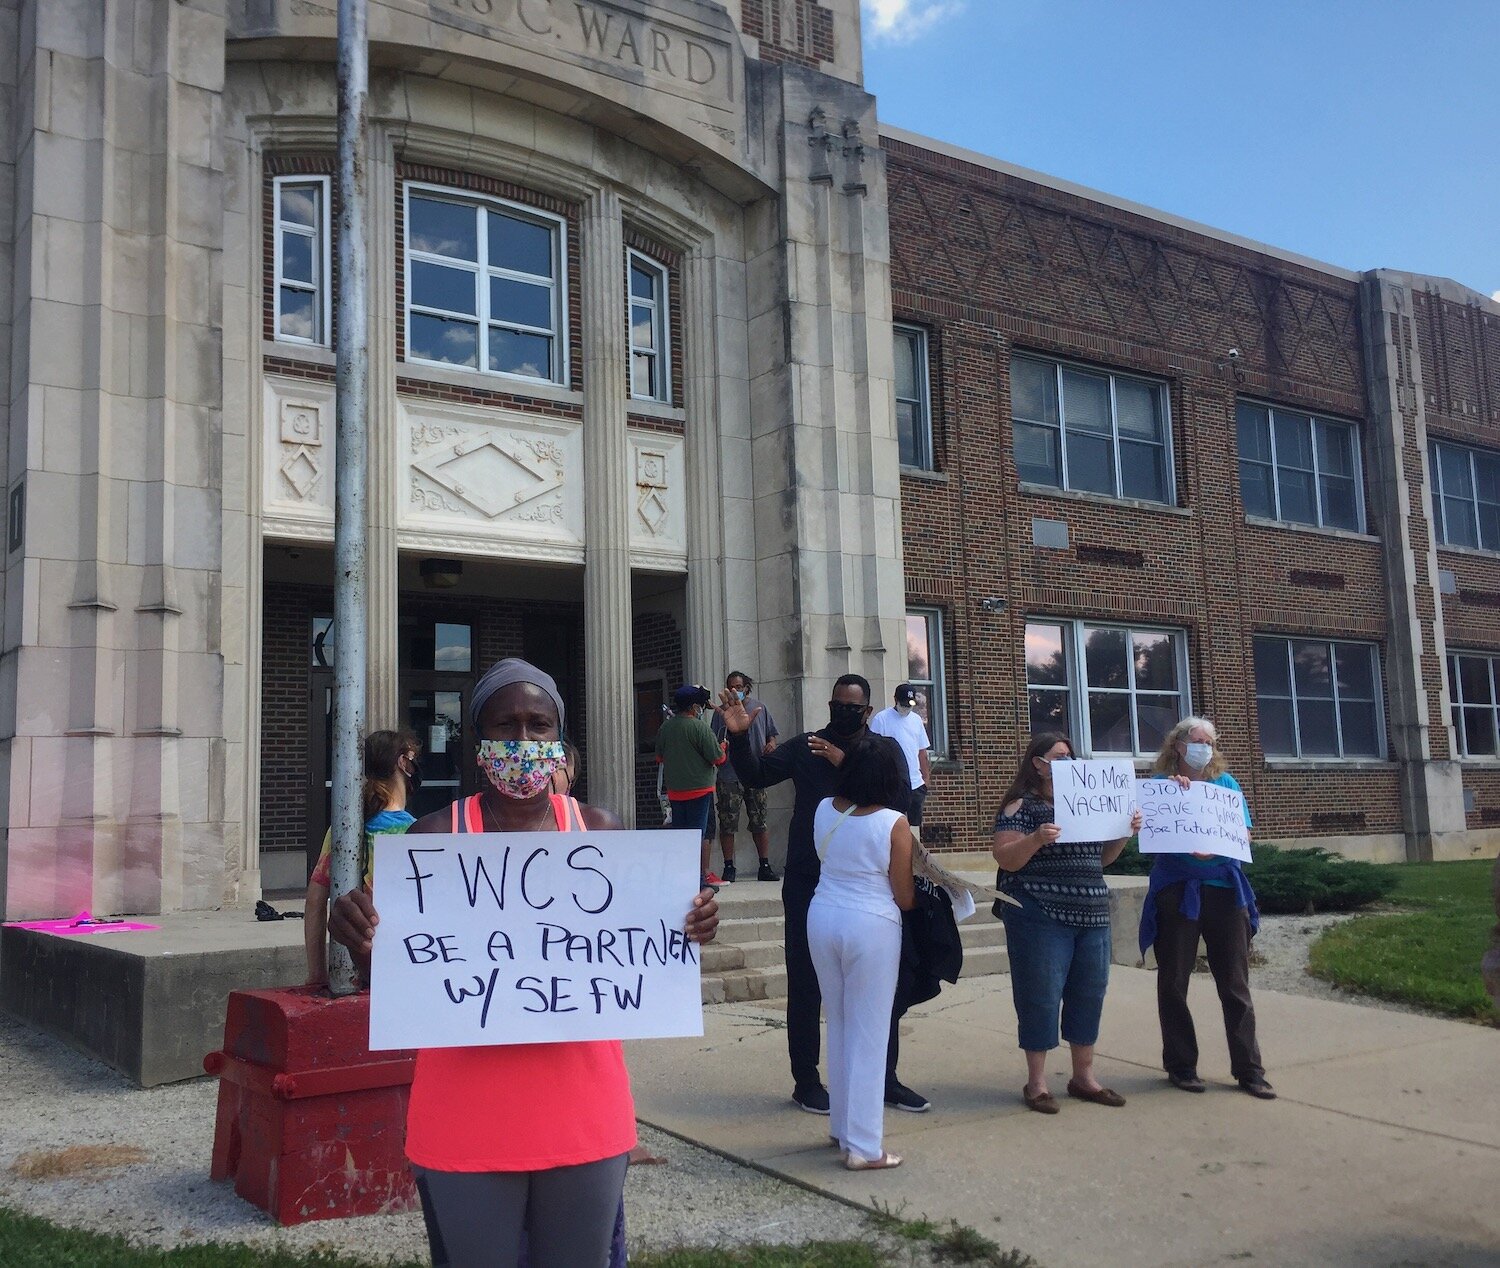 Diane Rogers was one of the organizers behind Friday's protest to save Ward School.